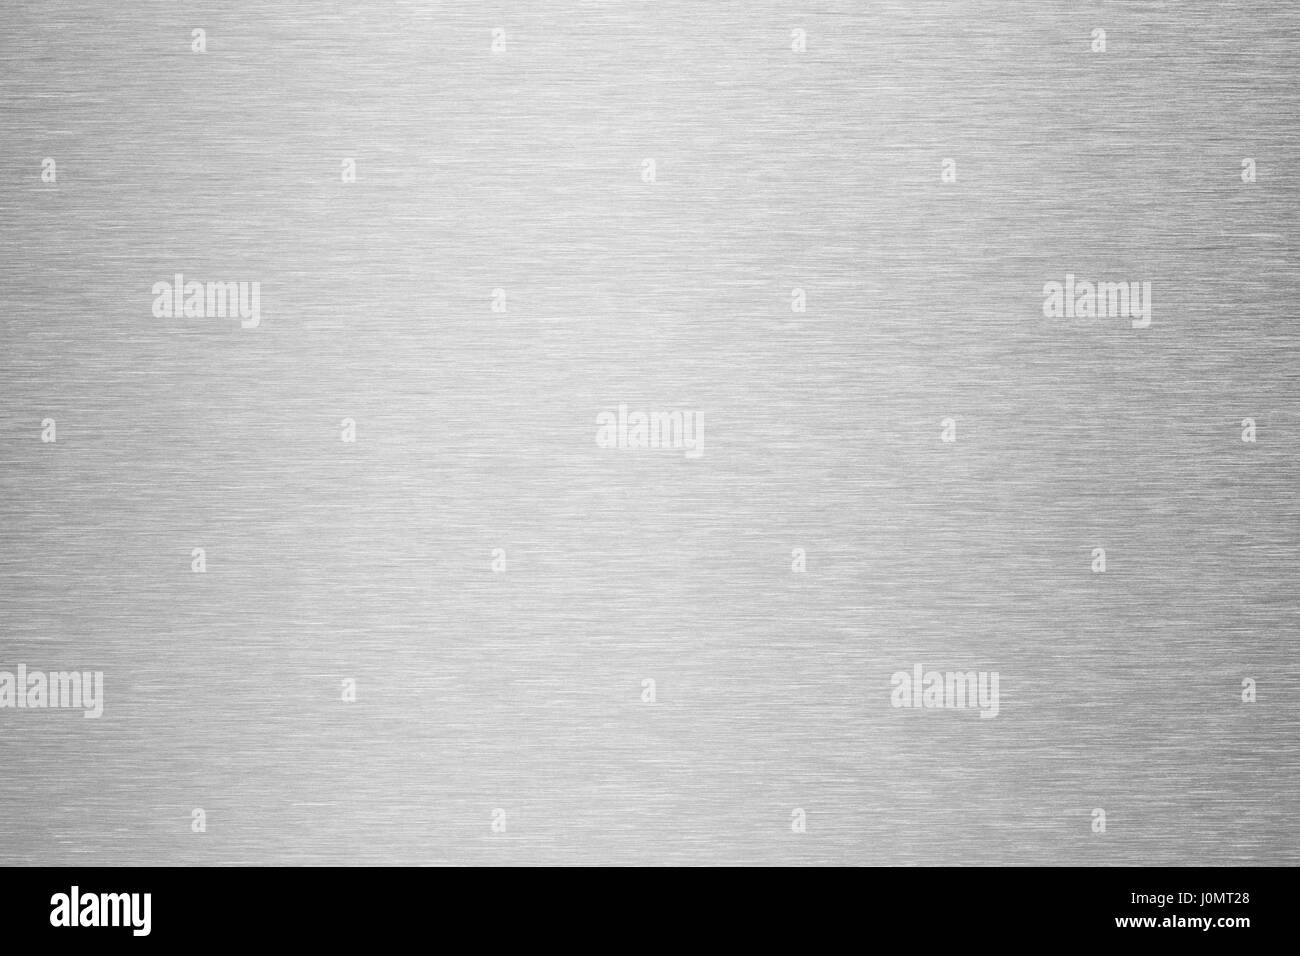 Glossy textured Black and White Stock Photos & Images - Alamy